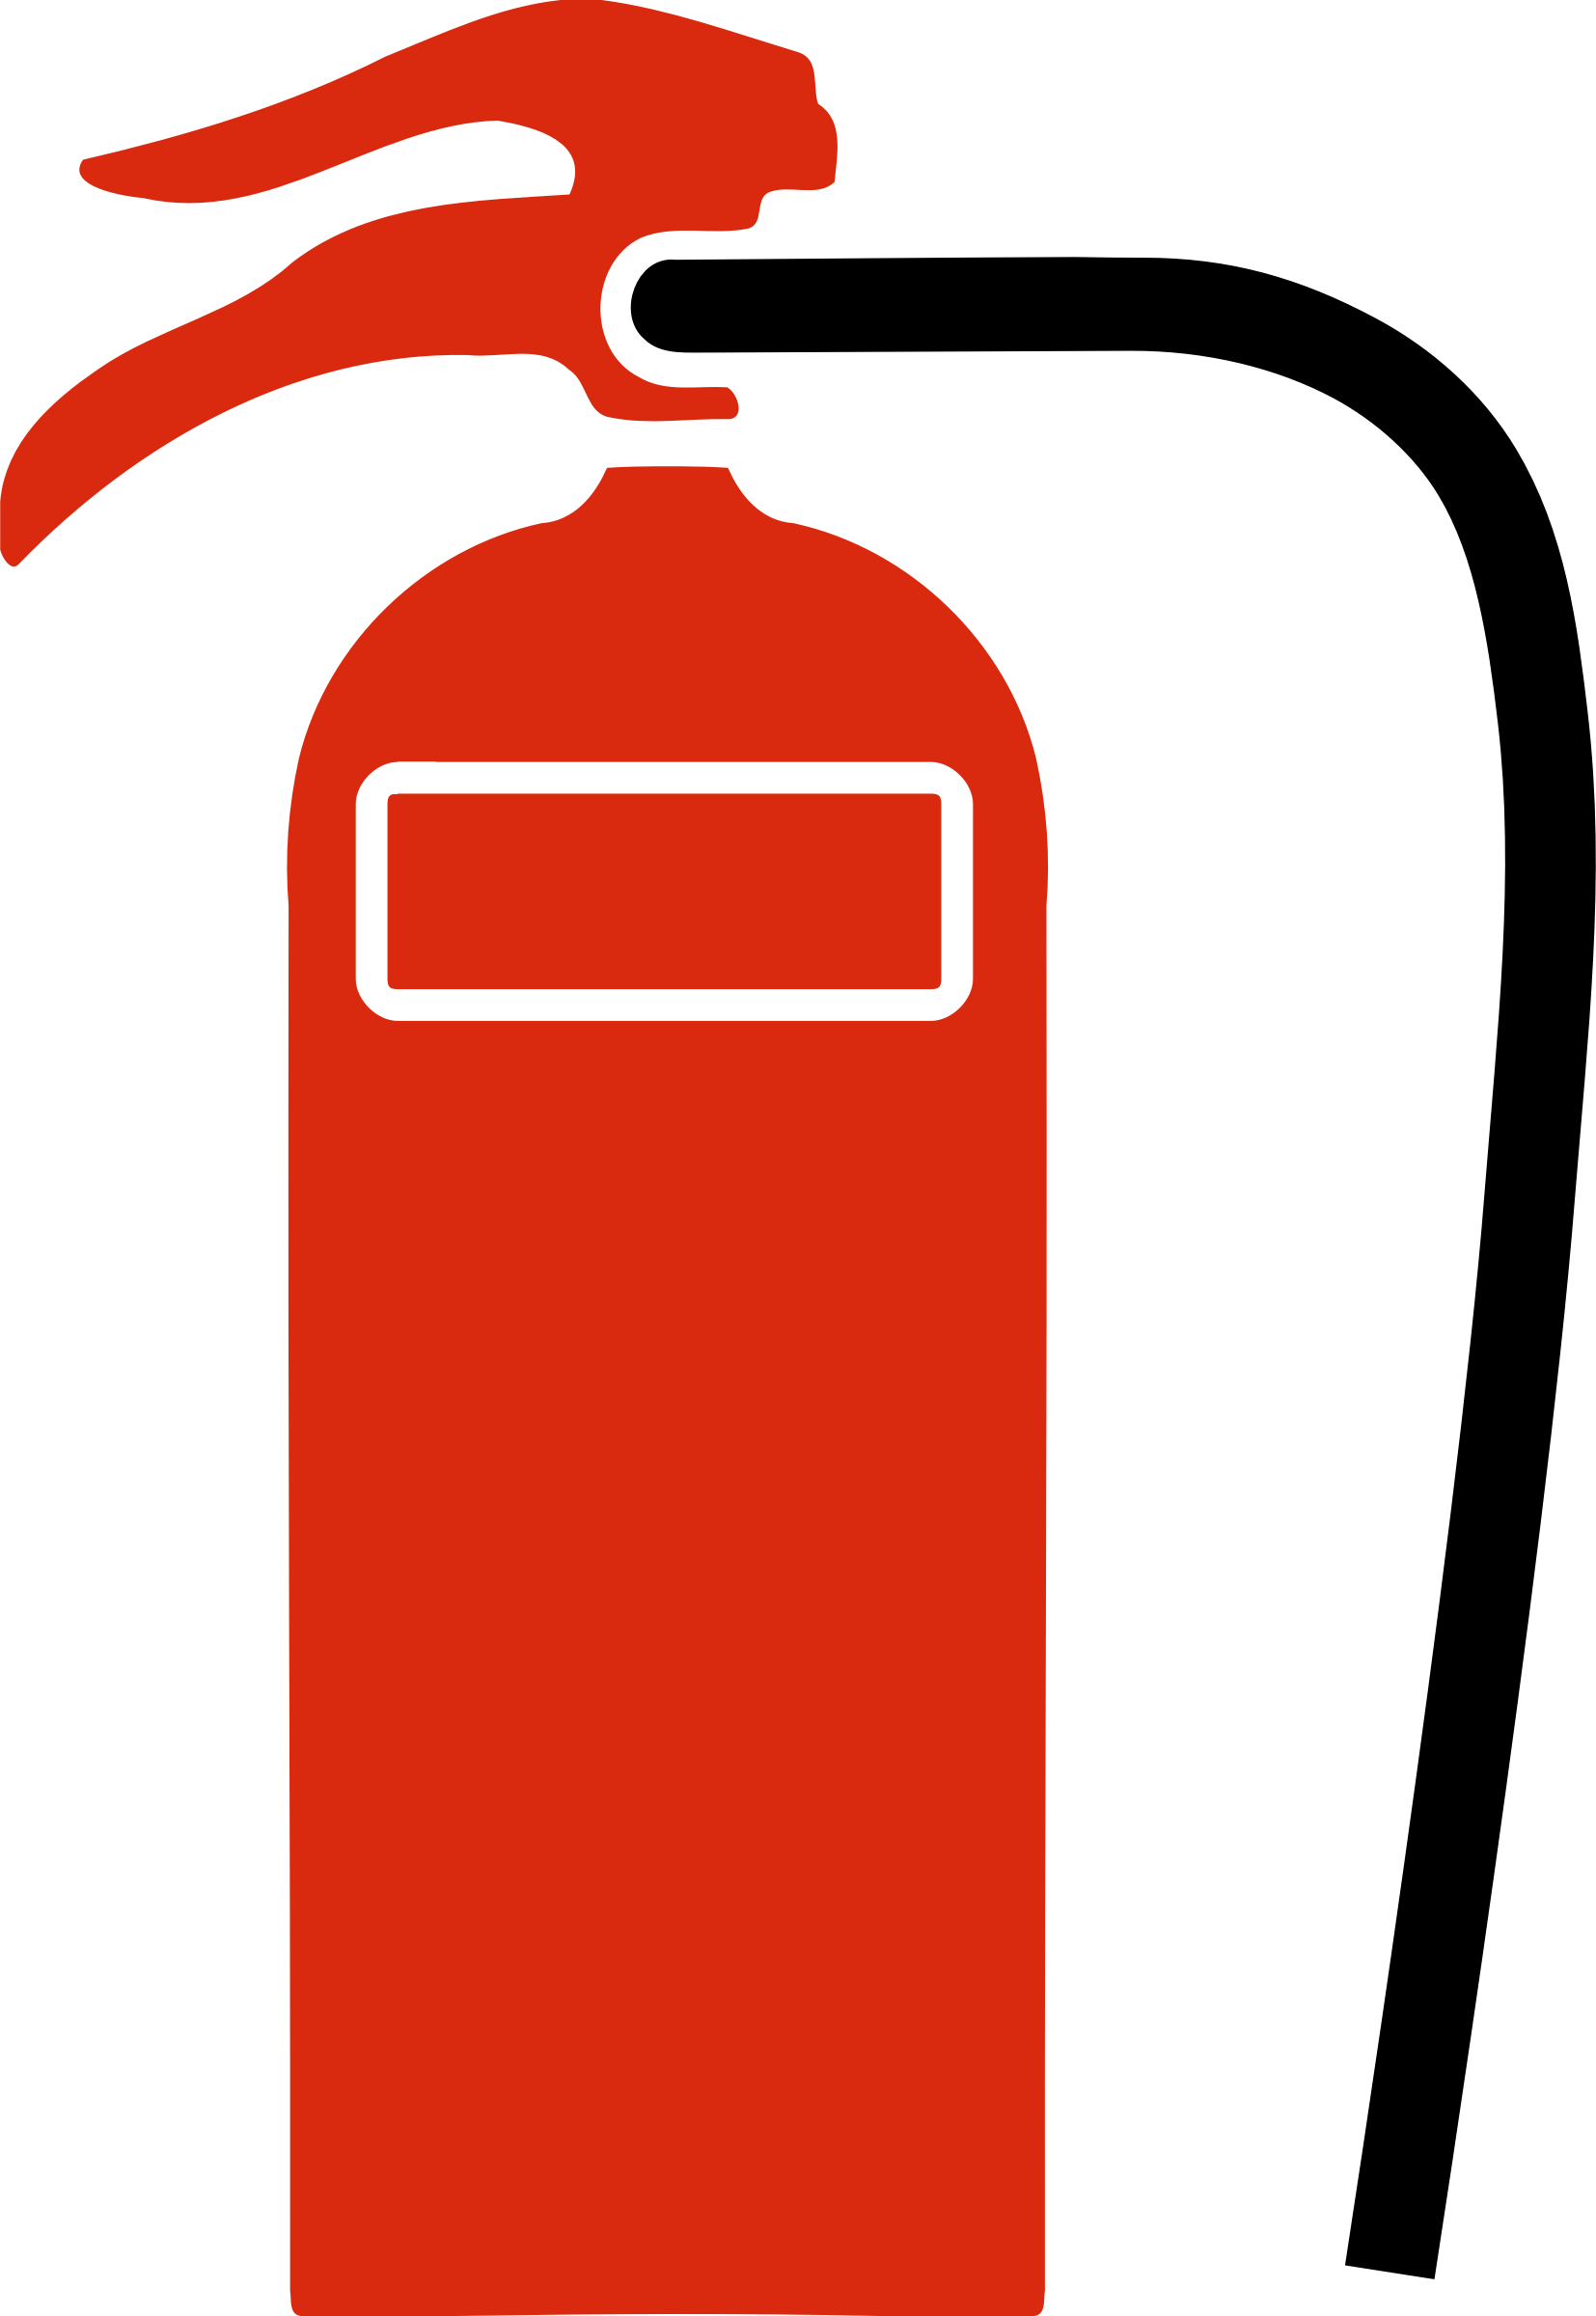 fire extinguisher clipart - photo #47